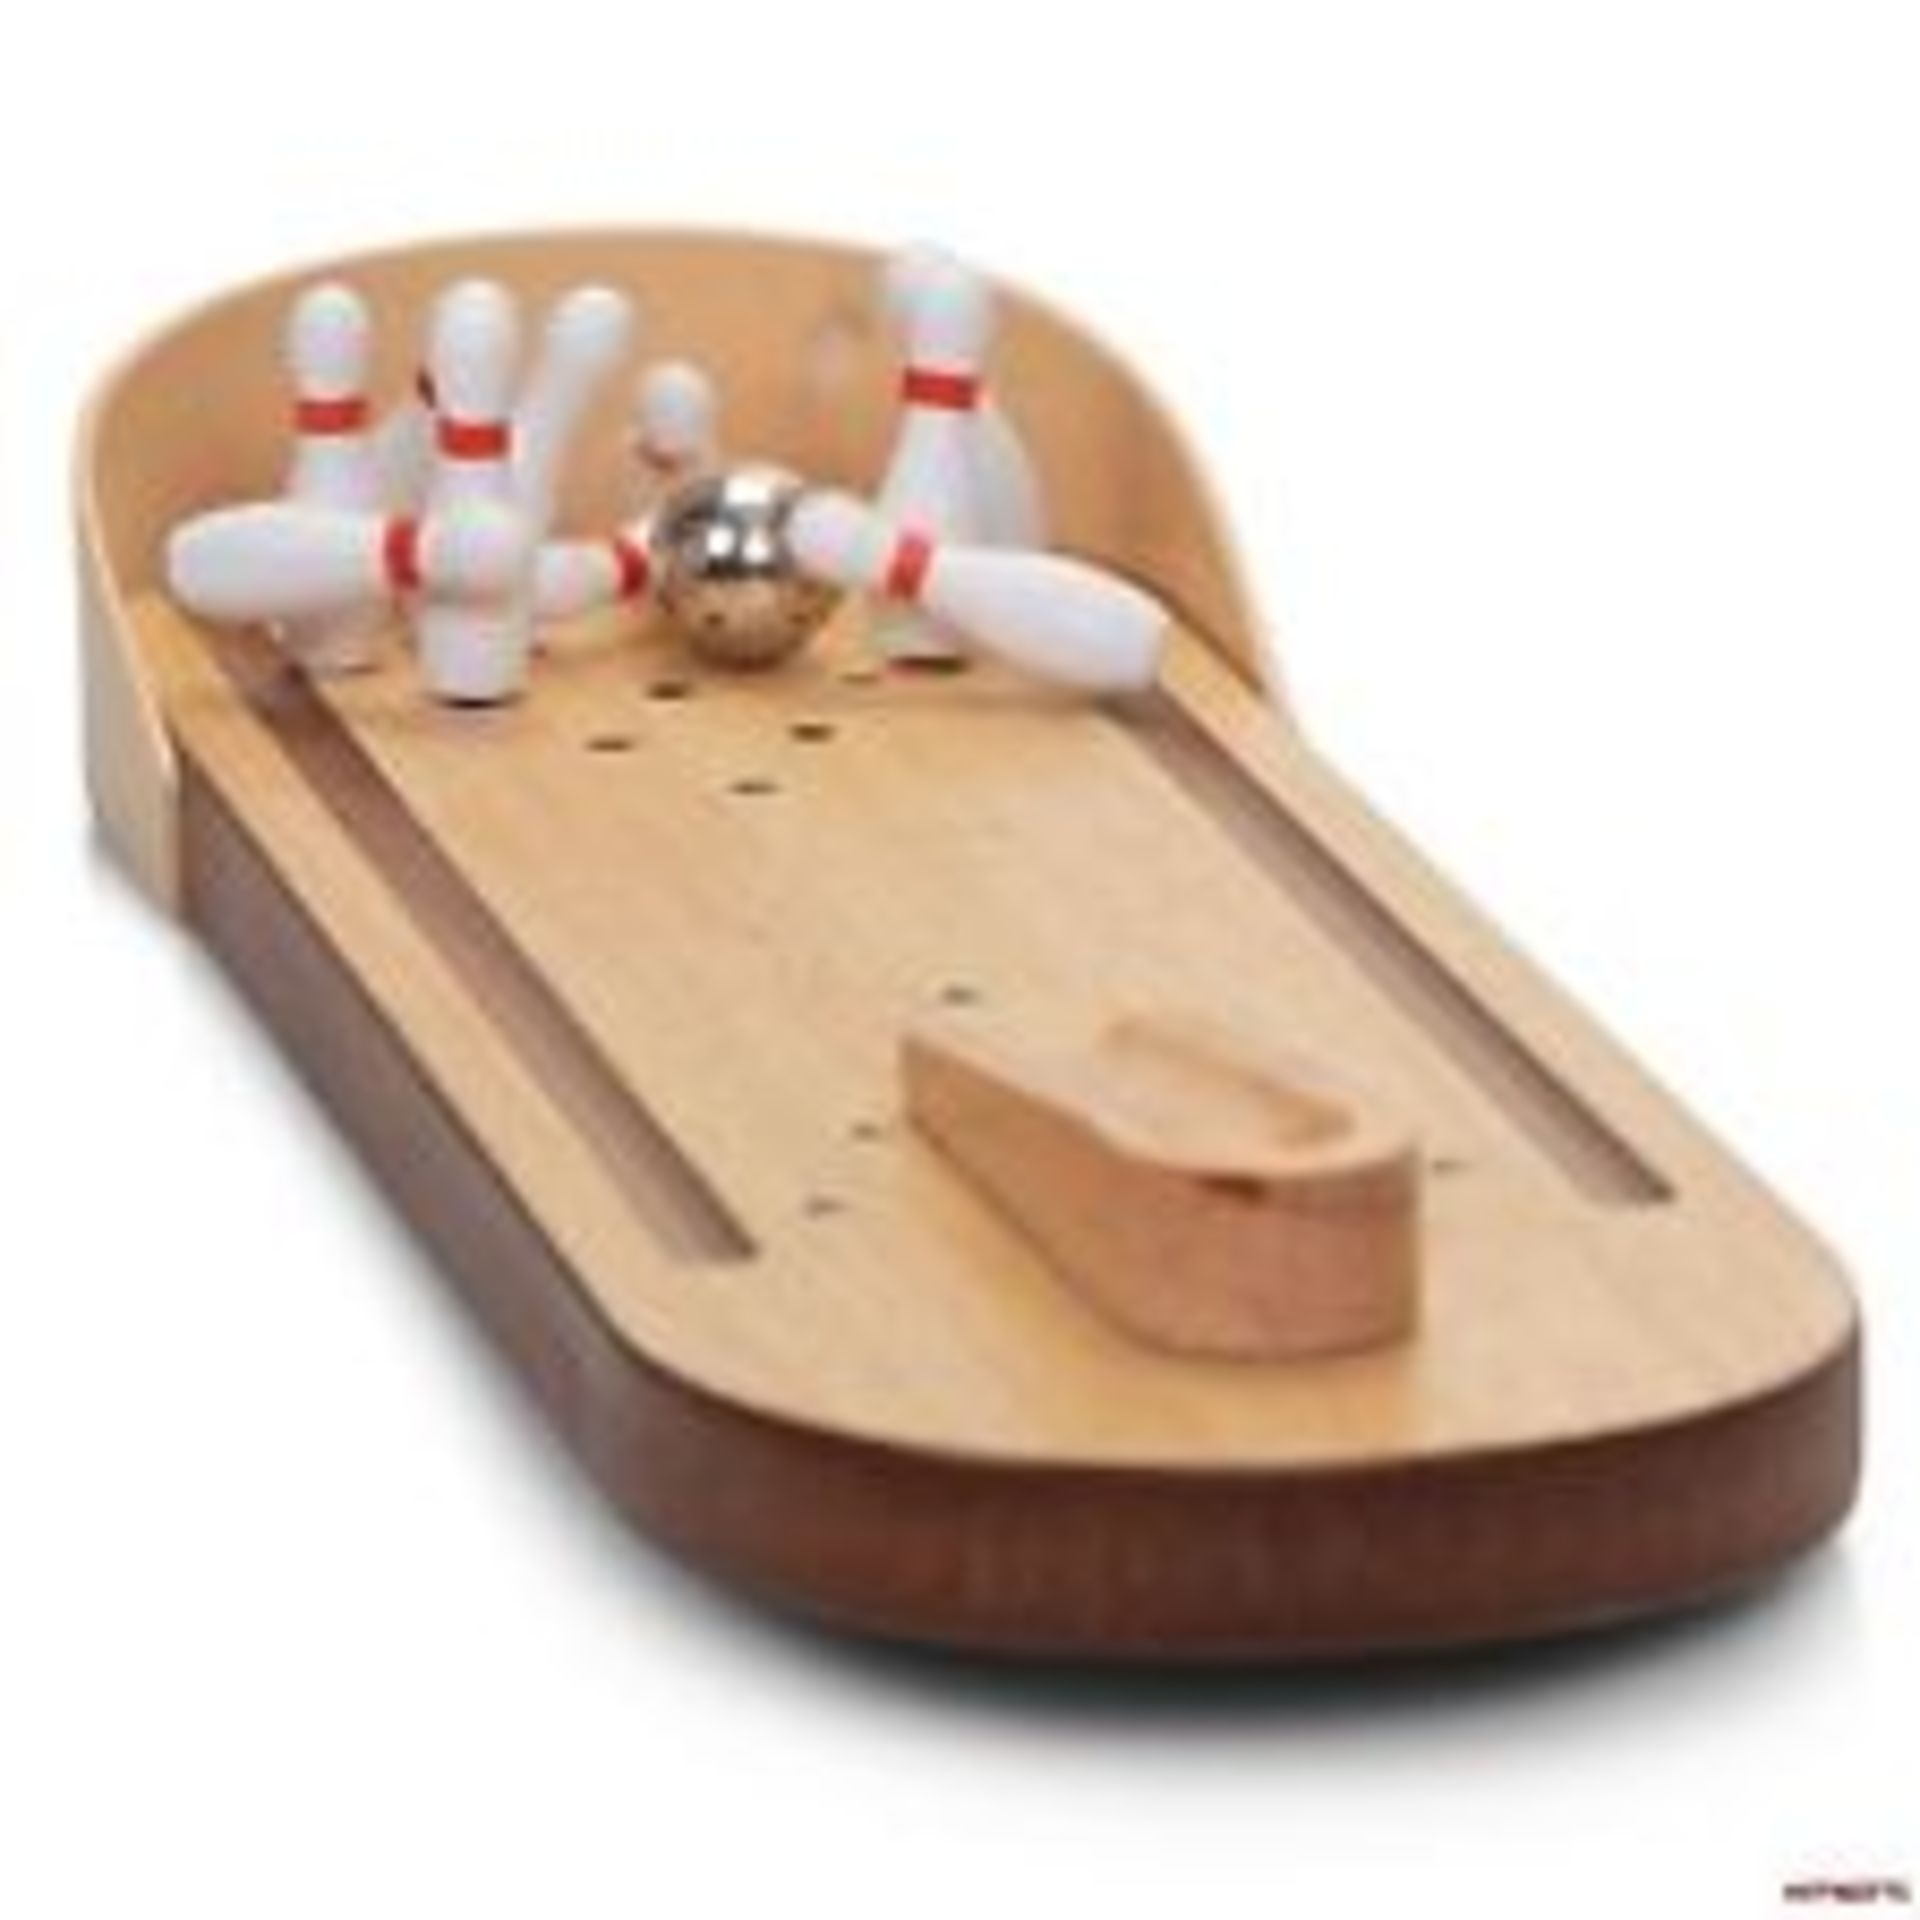 V Brand New Ten Pin Bowling Alley Game